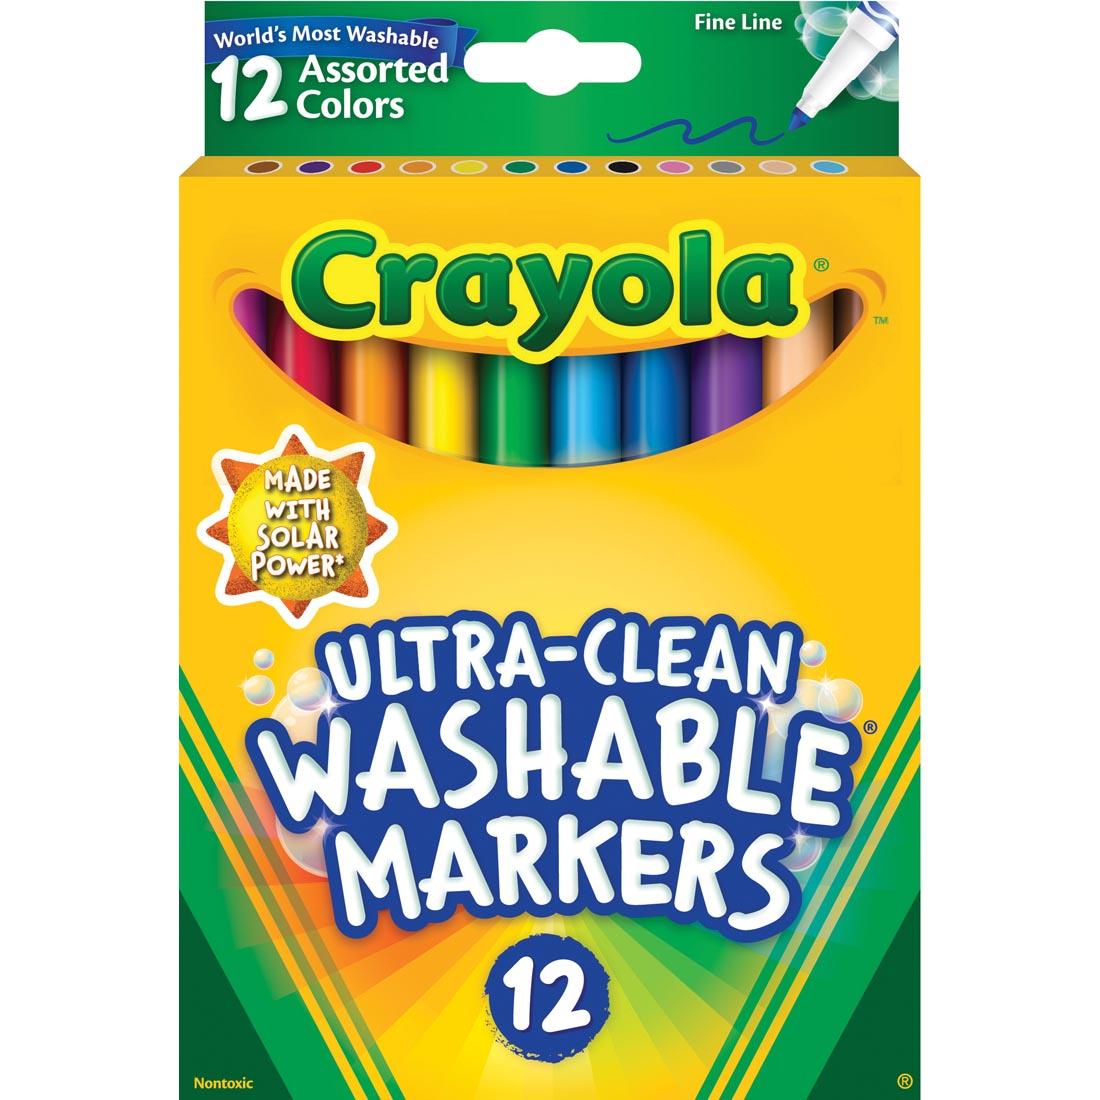 Crayola Ultra-Clean Washable Fine Line Markers 12-Color Set Package